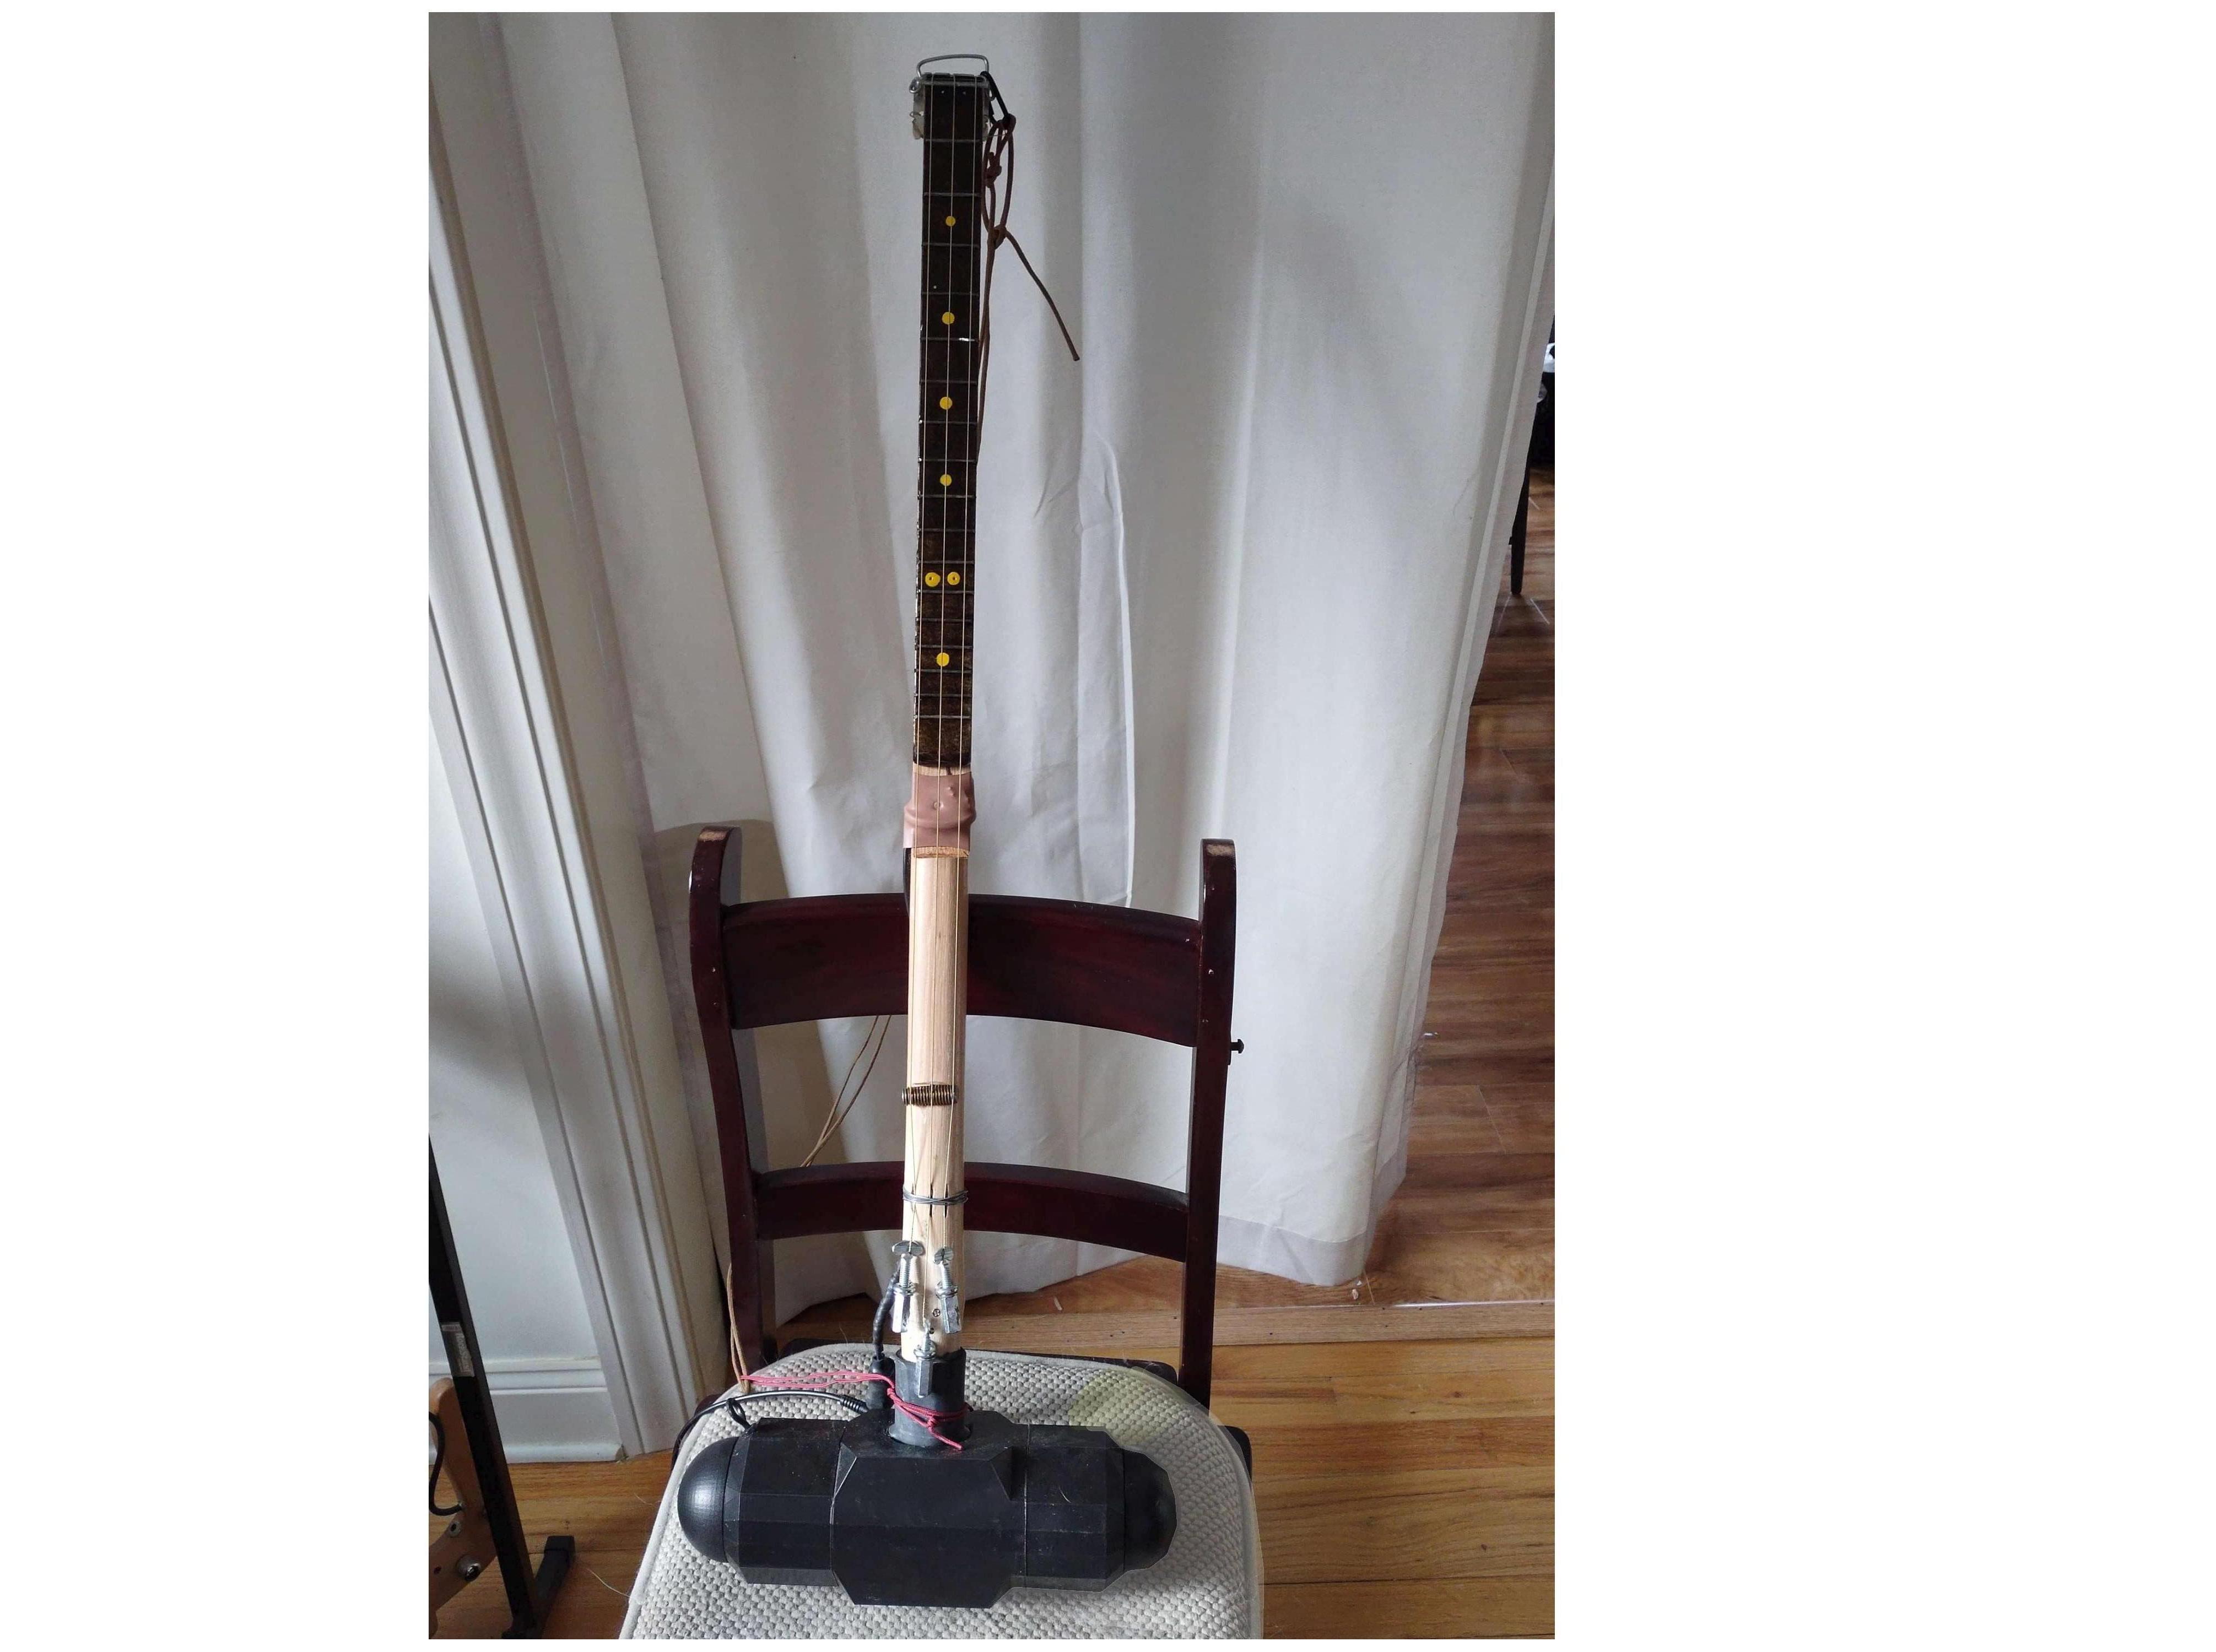 3 String Guitar Made From Hardware Store Parts: the Sledgehammer